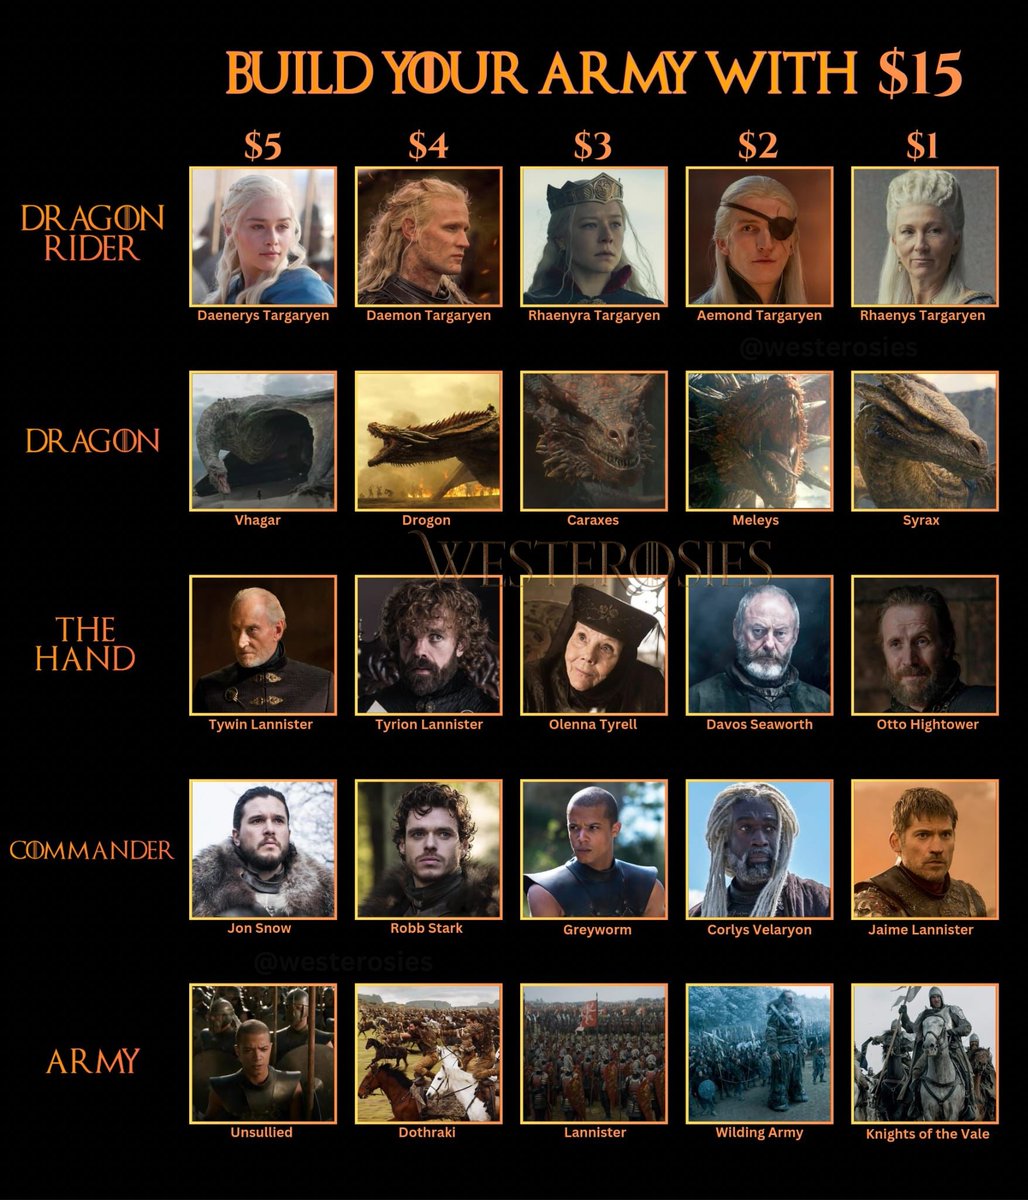 RT @westerosies: You have only $15, build your Game of Thrones army! https://t.co/Nbdvi60Kgt